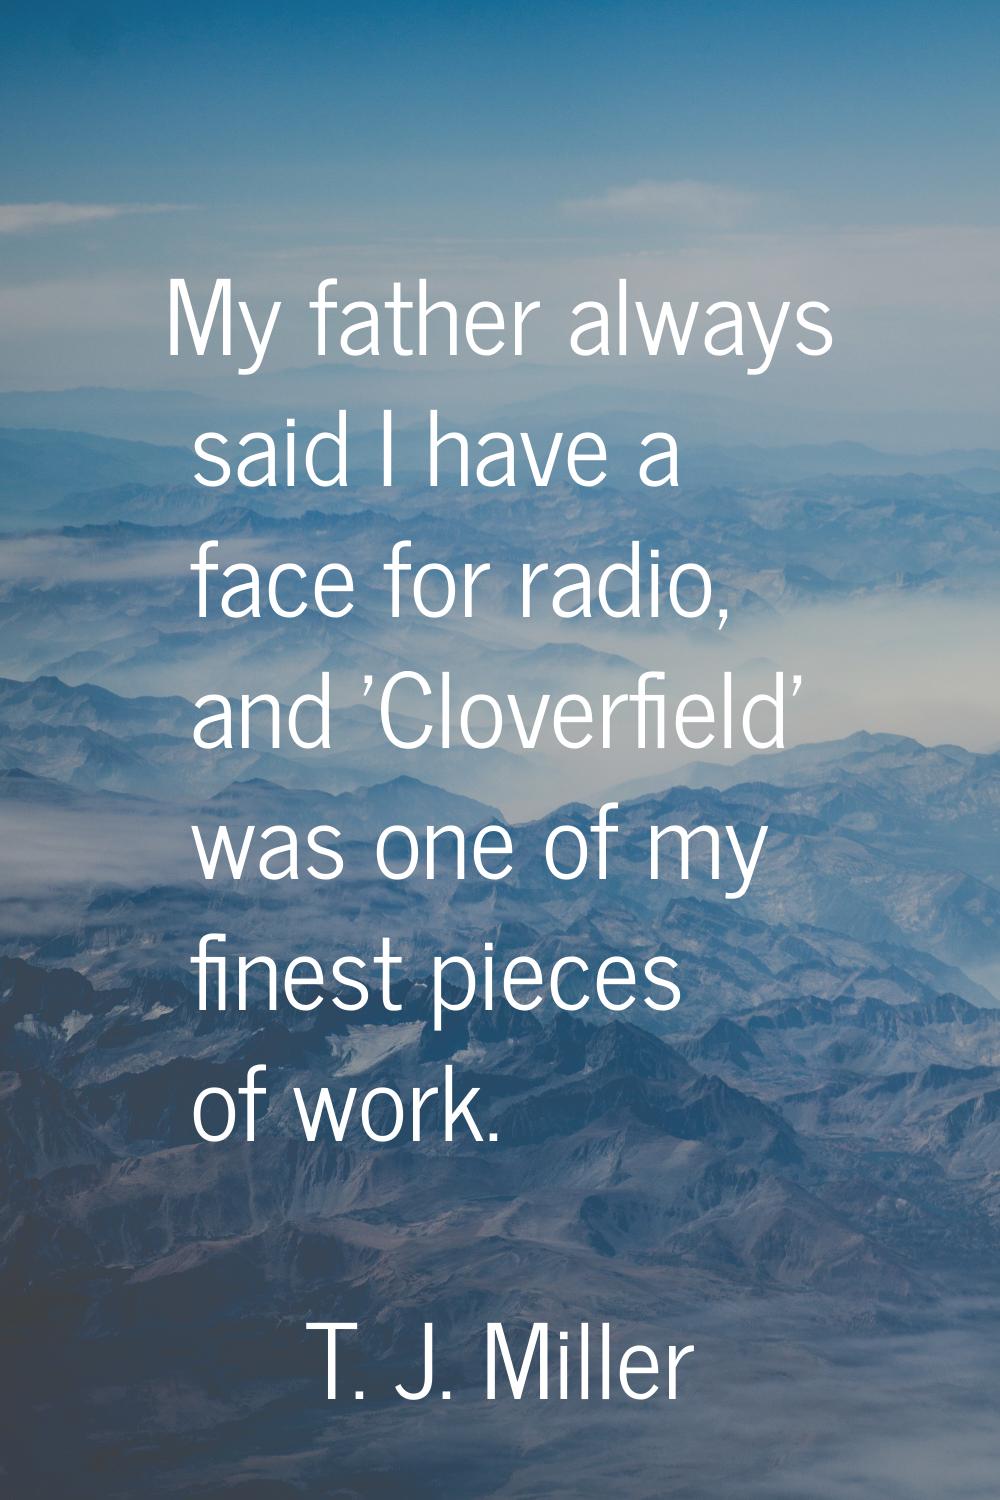 My father always said I have a face for radio, and 'Cloverfield' was one of my finest pieces of wor